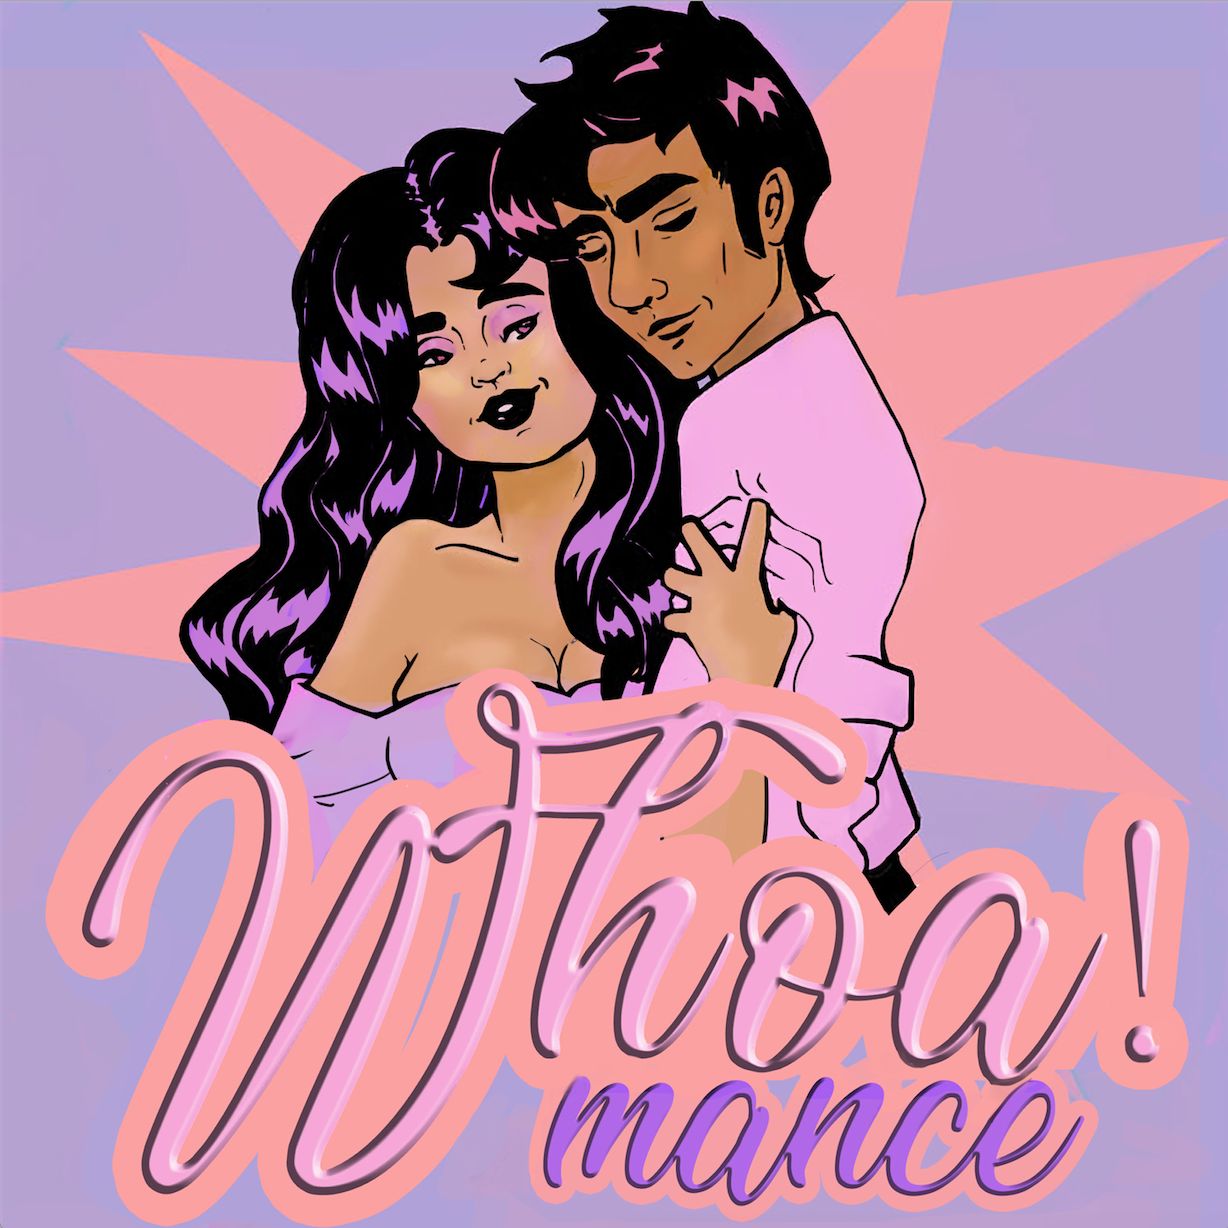 Whoa!mance: Romance, Feminism, and Ourselves